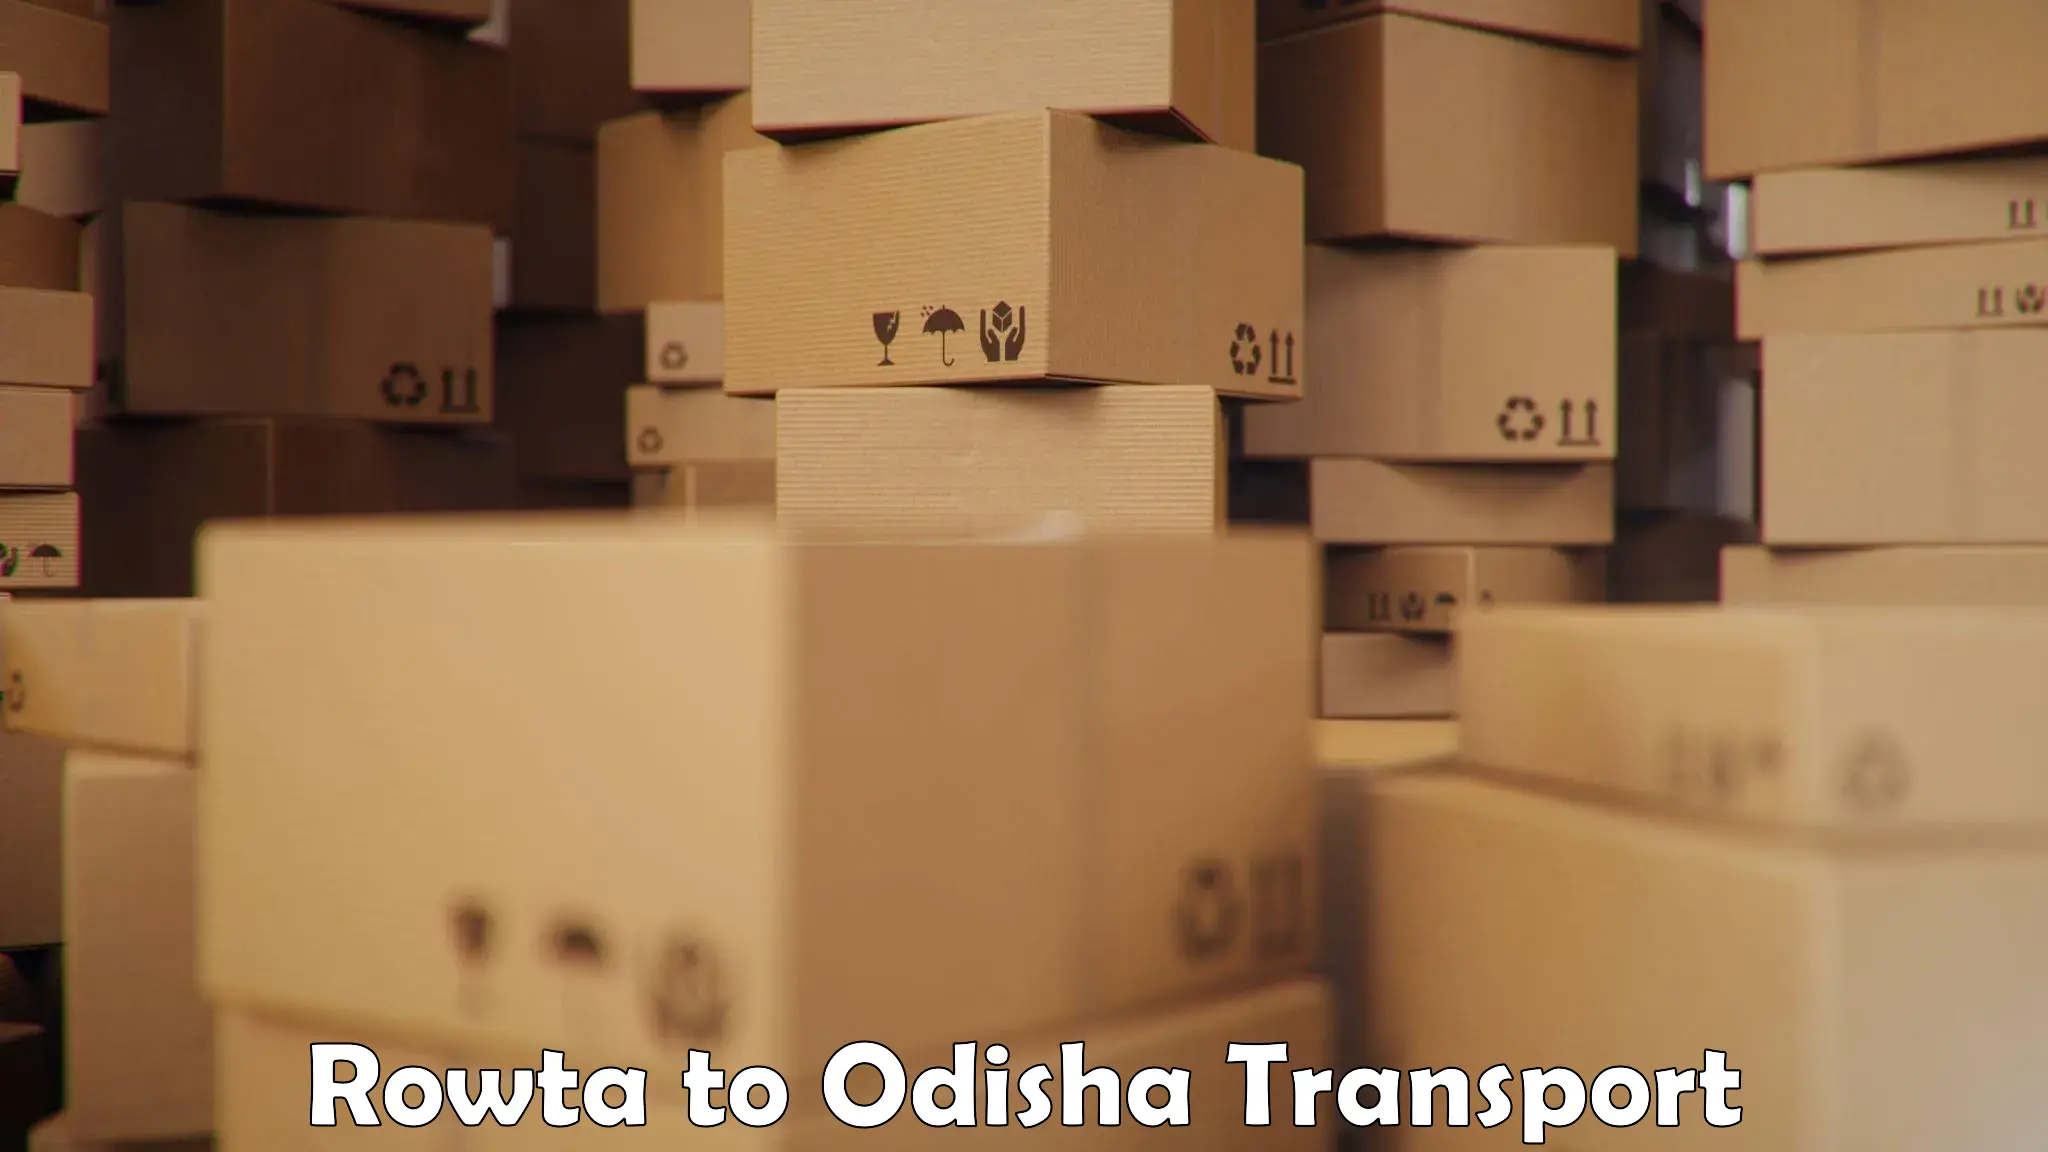 Air freight transport services Rowta to Paradip Port